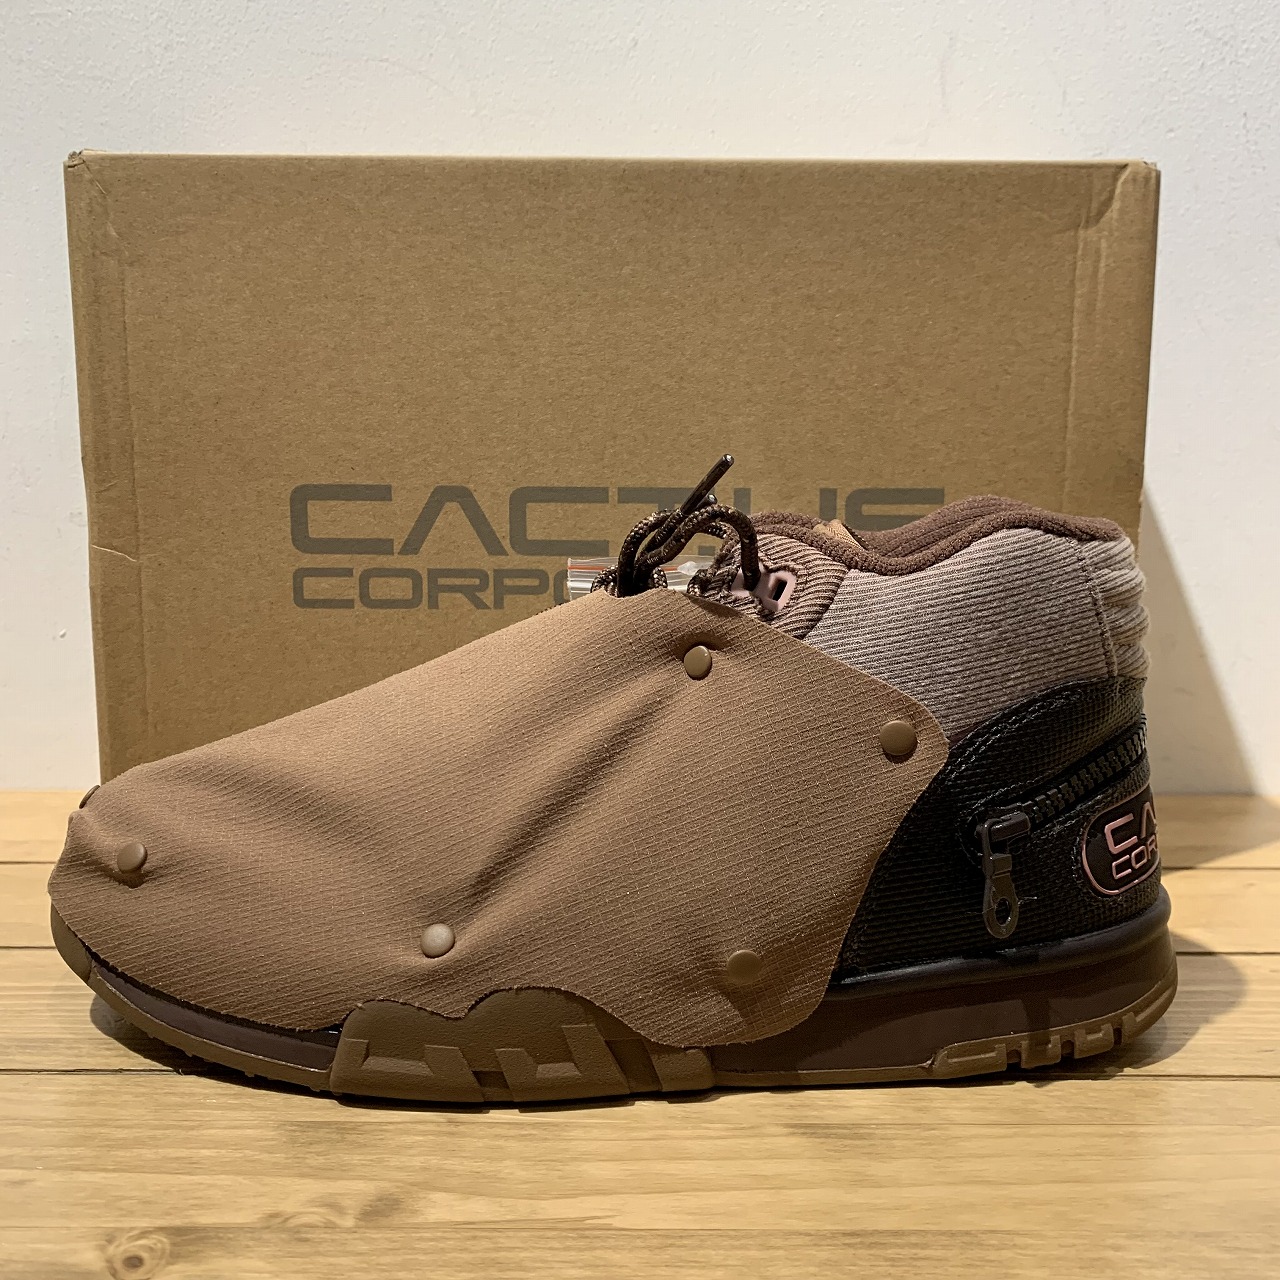 NIKE AIR TRAINER1 SP TRAVIS SCOTT ARCHAEO BROWN AND RUST PINK 28cm DR7515-200 ブラウン ナイキ エアトレーナー トラビス 心斎橋店のサムネイル